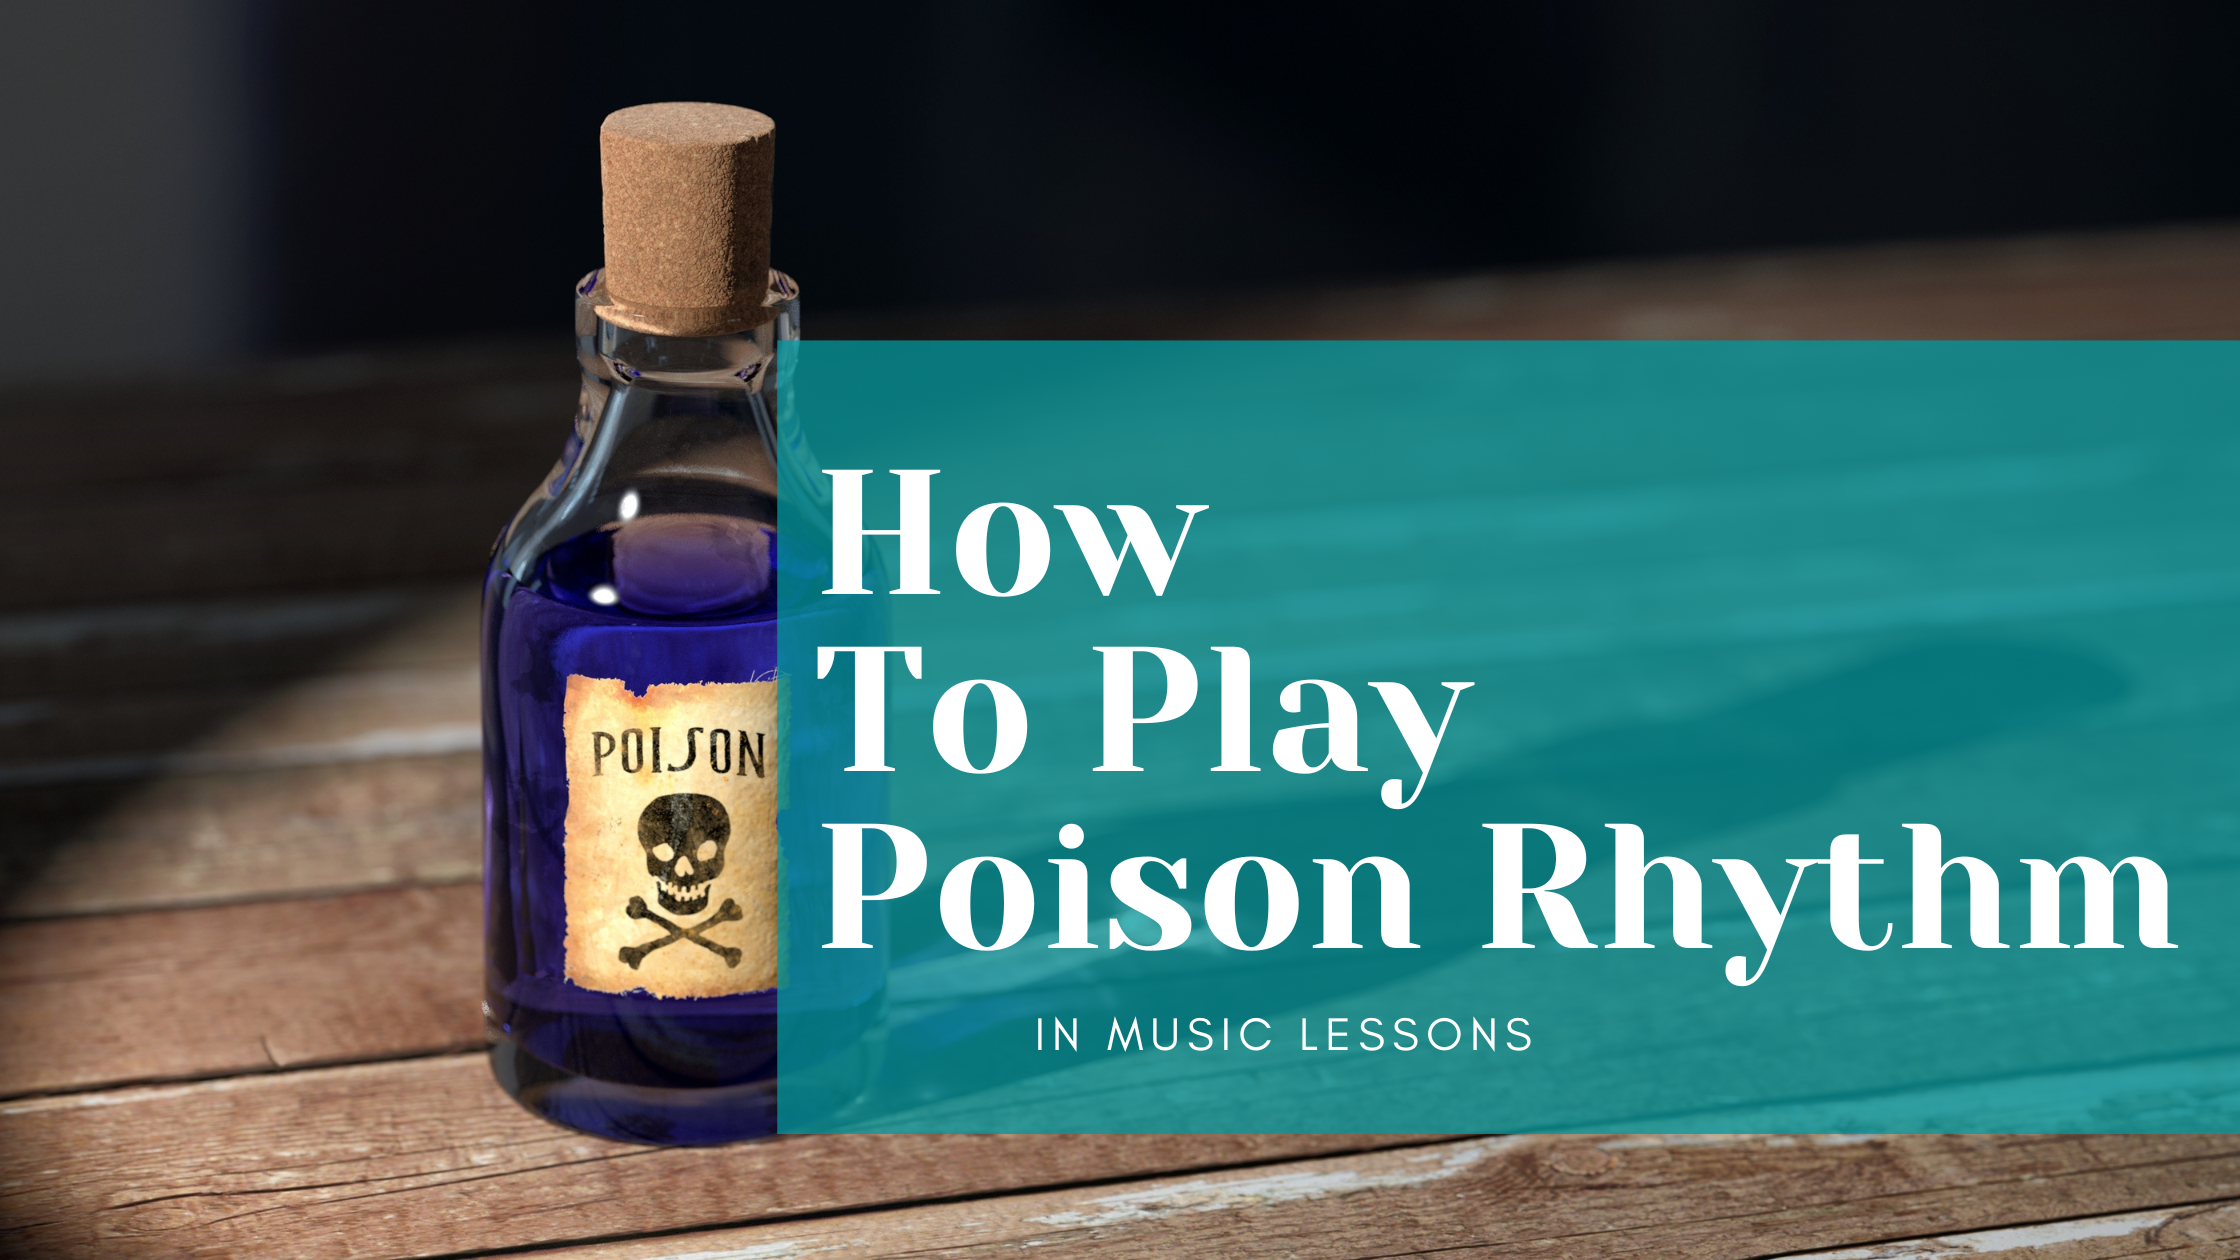 How To Play Poison Rhythm Game in music lessons